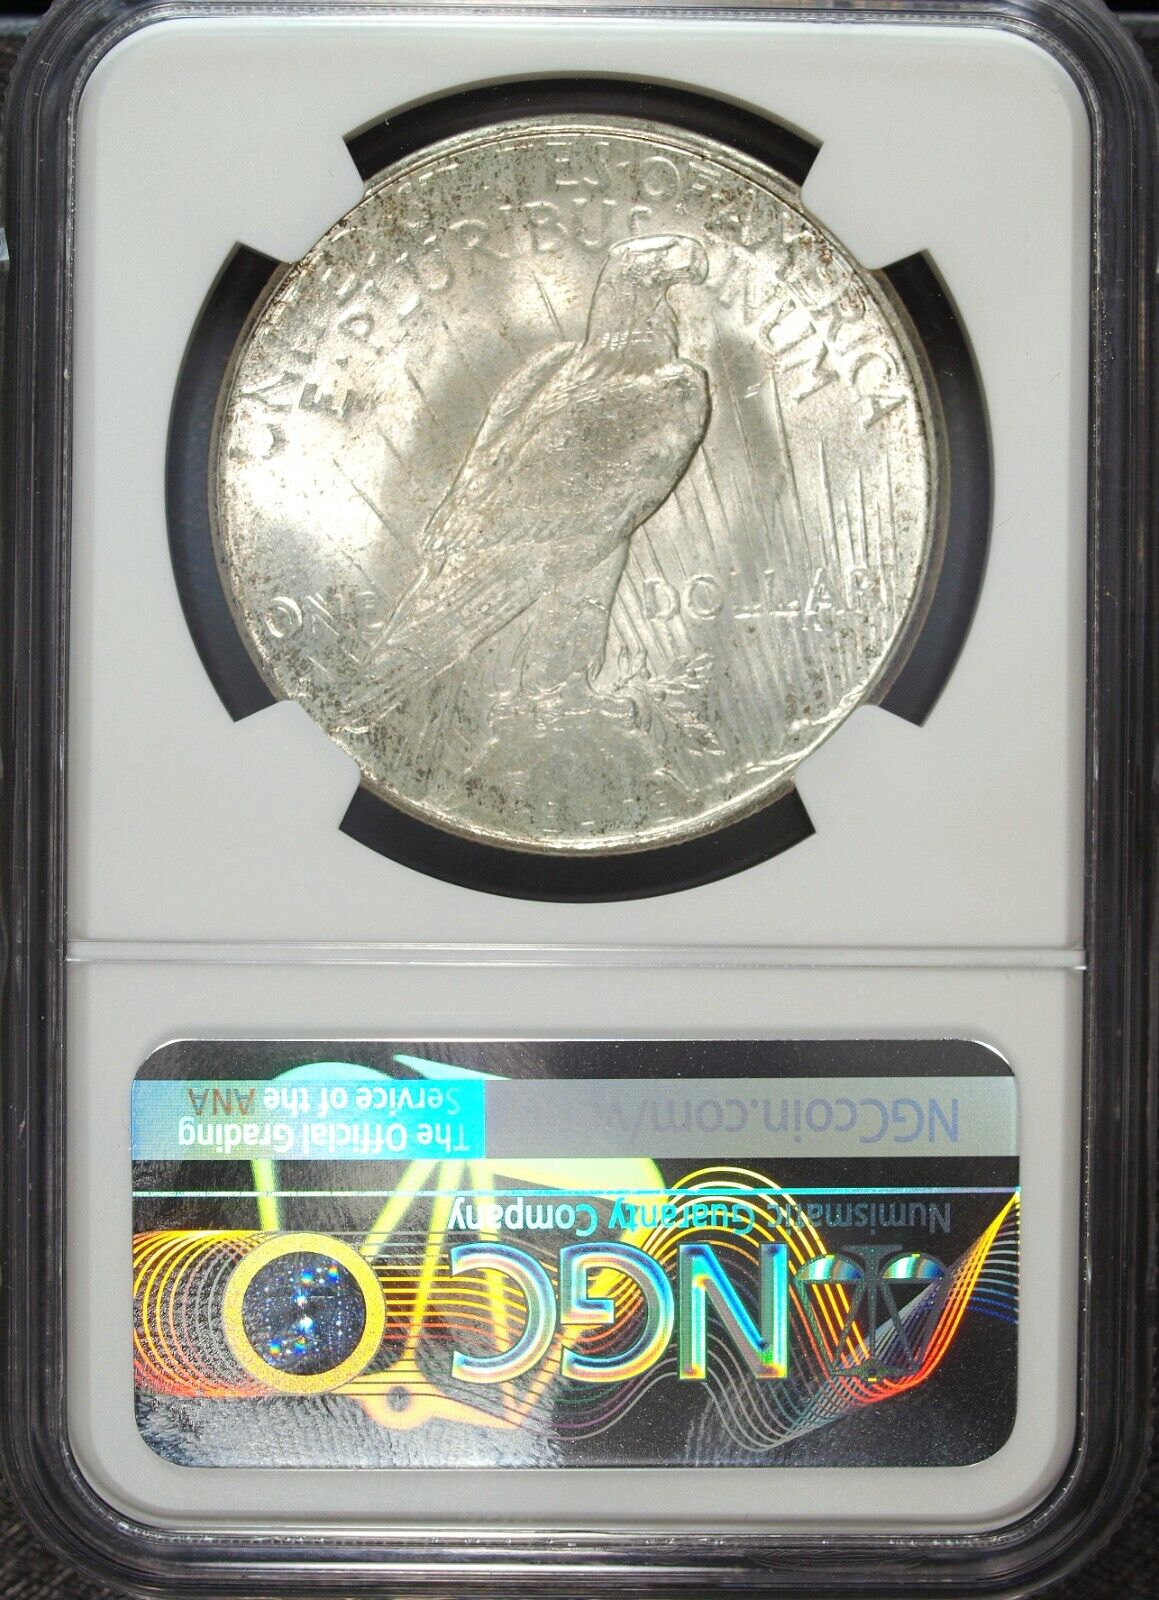 1928 S NGC MS 62 Peace Silver Dollar ☆☆ Great Collectible ☆☆ 006